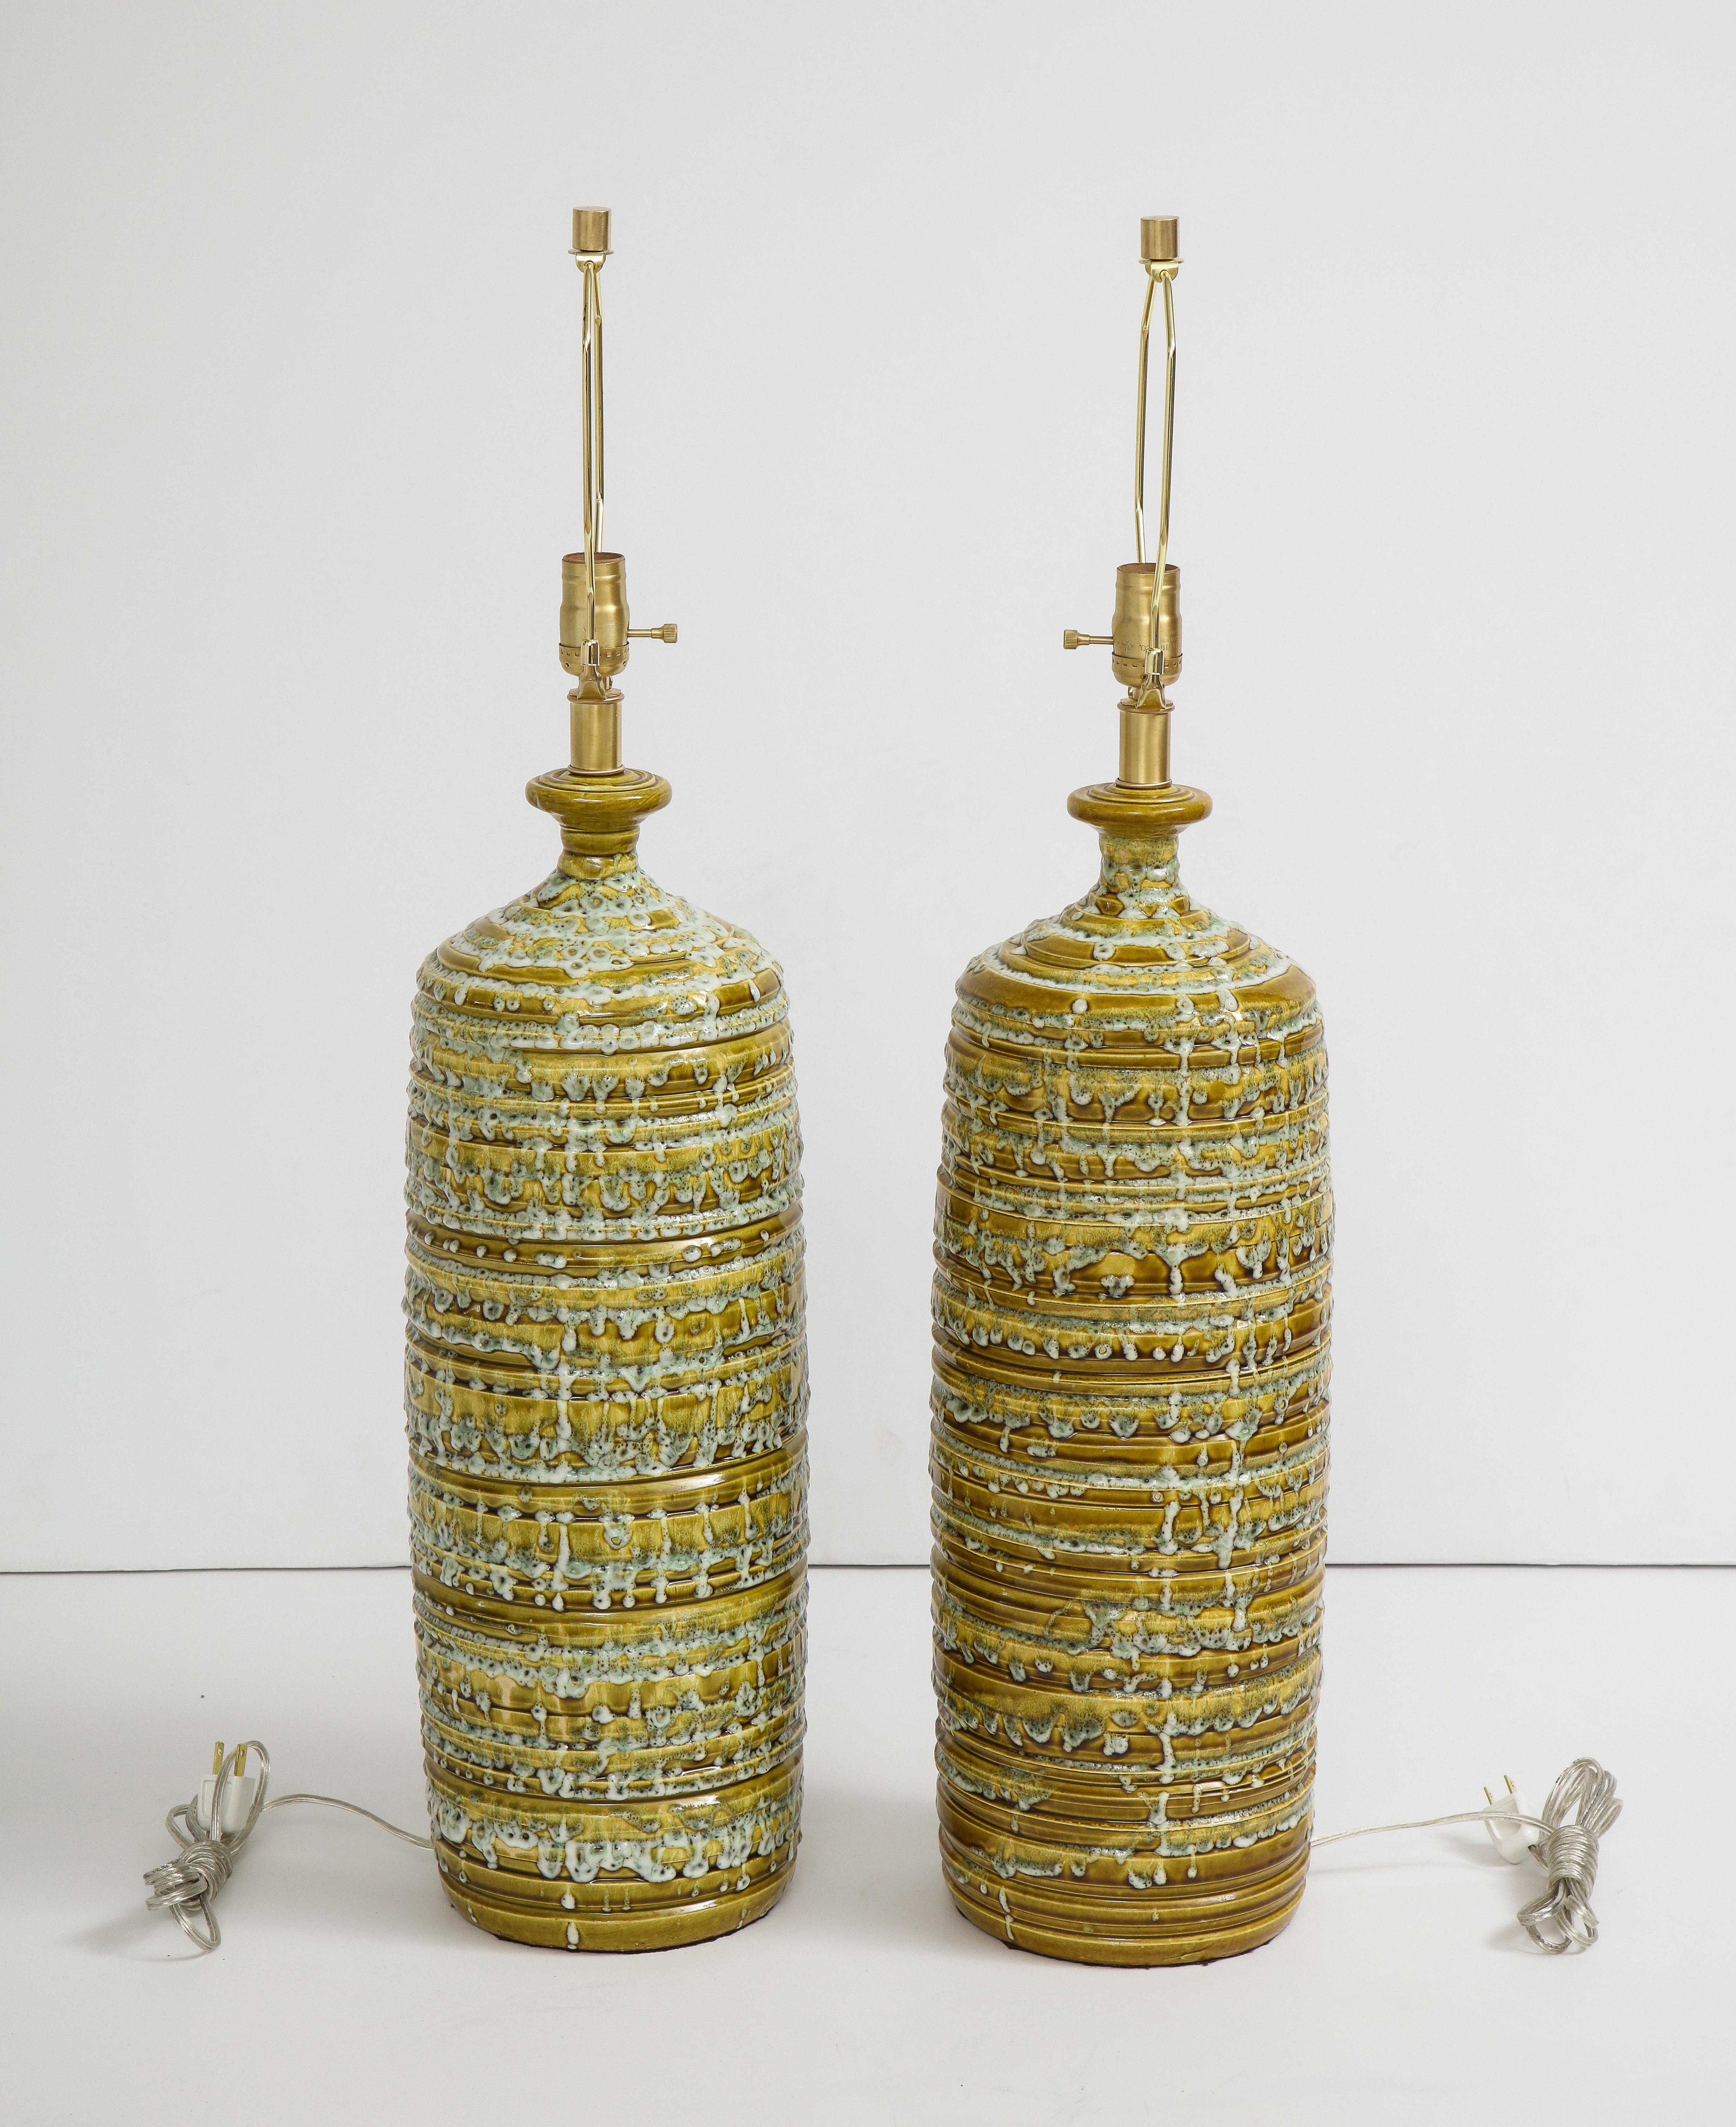 Exquisite pair of bottle form ceramic lamps in moss and loden green and off white glazes. Rewired for use in the USA, 100W bulbs. Satin brass hardware.